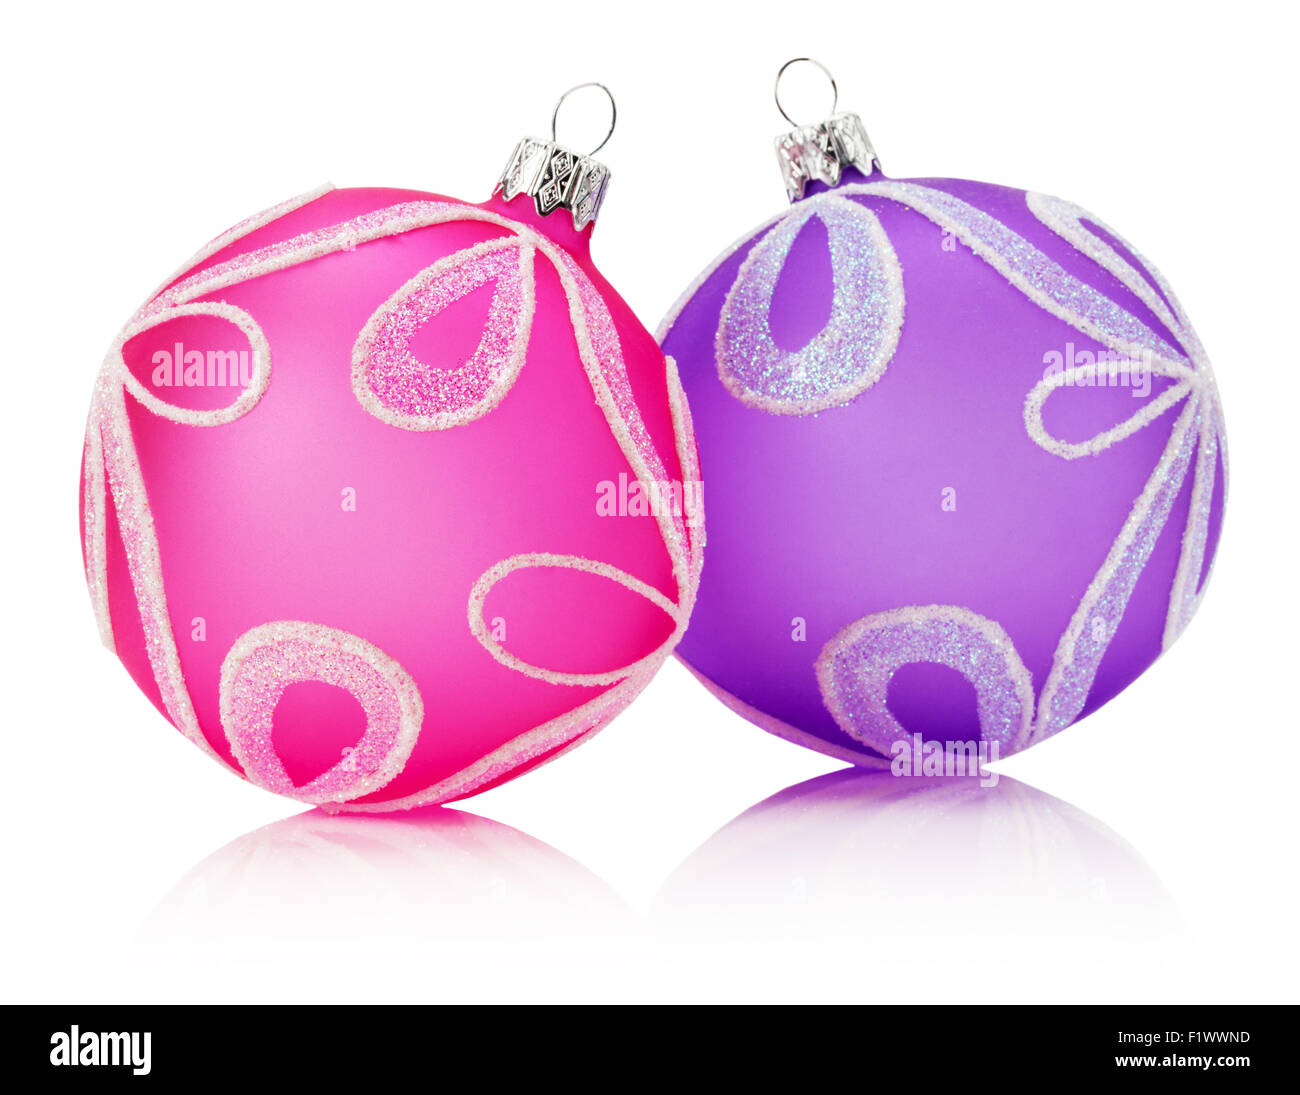 pink and purple Christmas balls isolated on the white background. Stock Photo